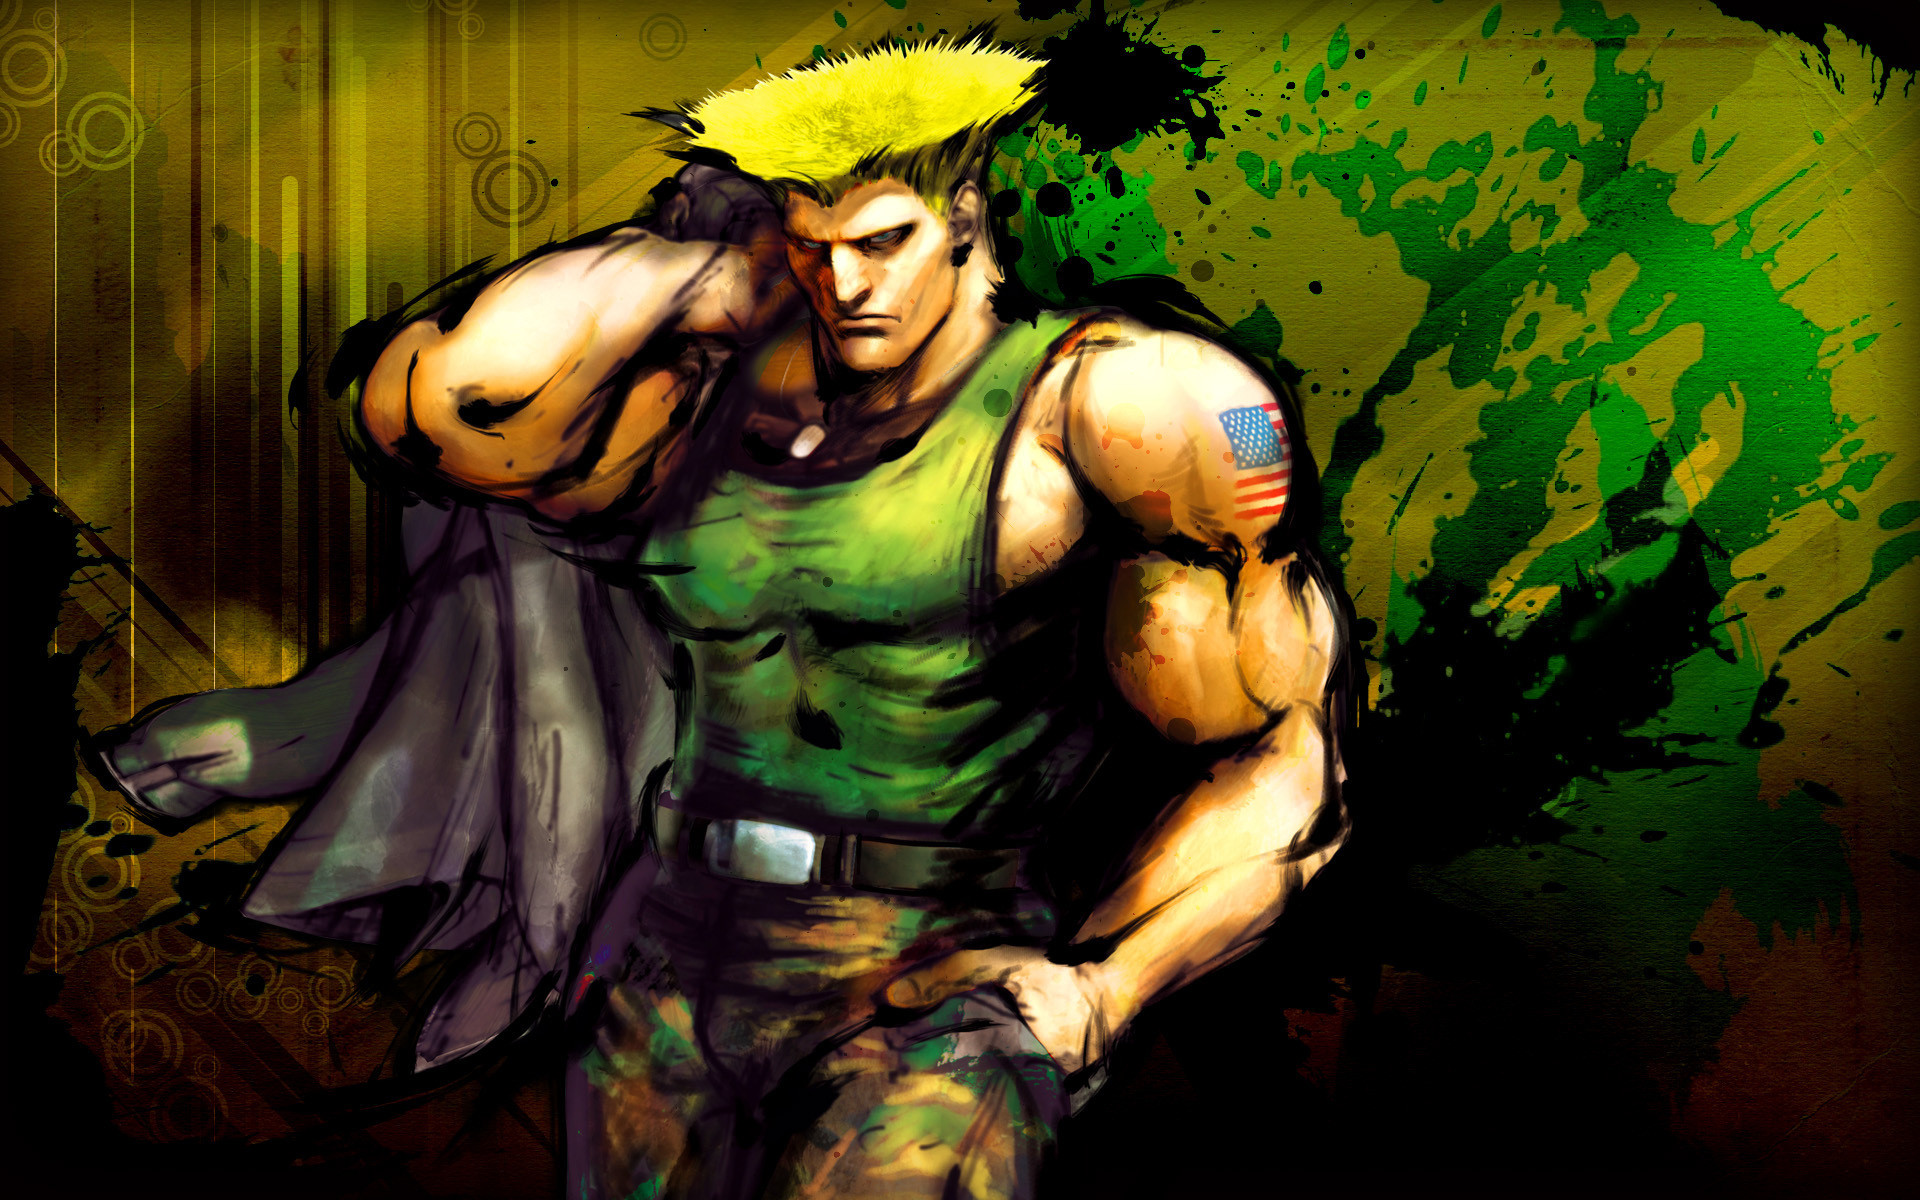 1920x1200 Street Fighter images Guile HD wallpaper and background photos